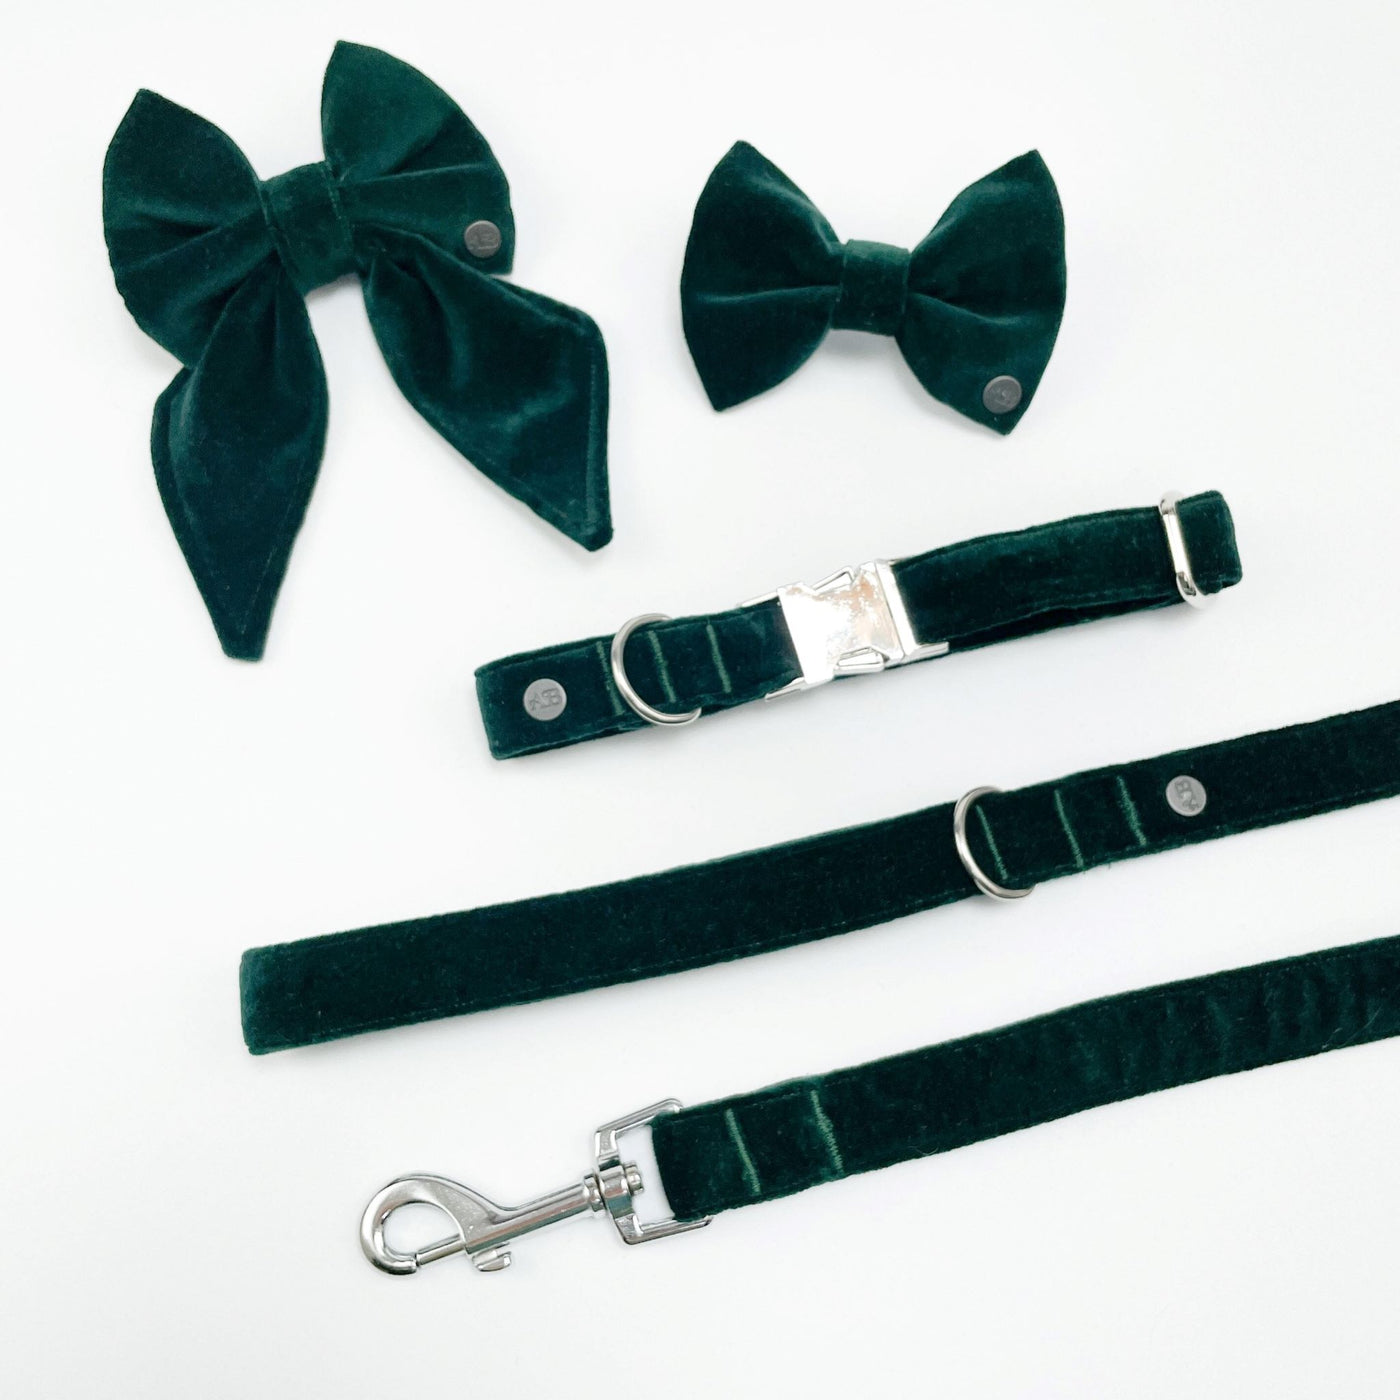 Luxury Emerald Green Velvet Dog Lead and matching accessories sold separately. 